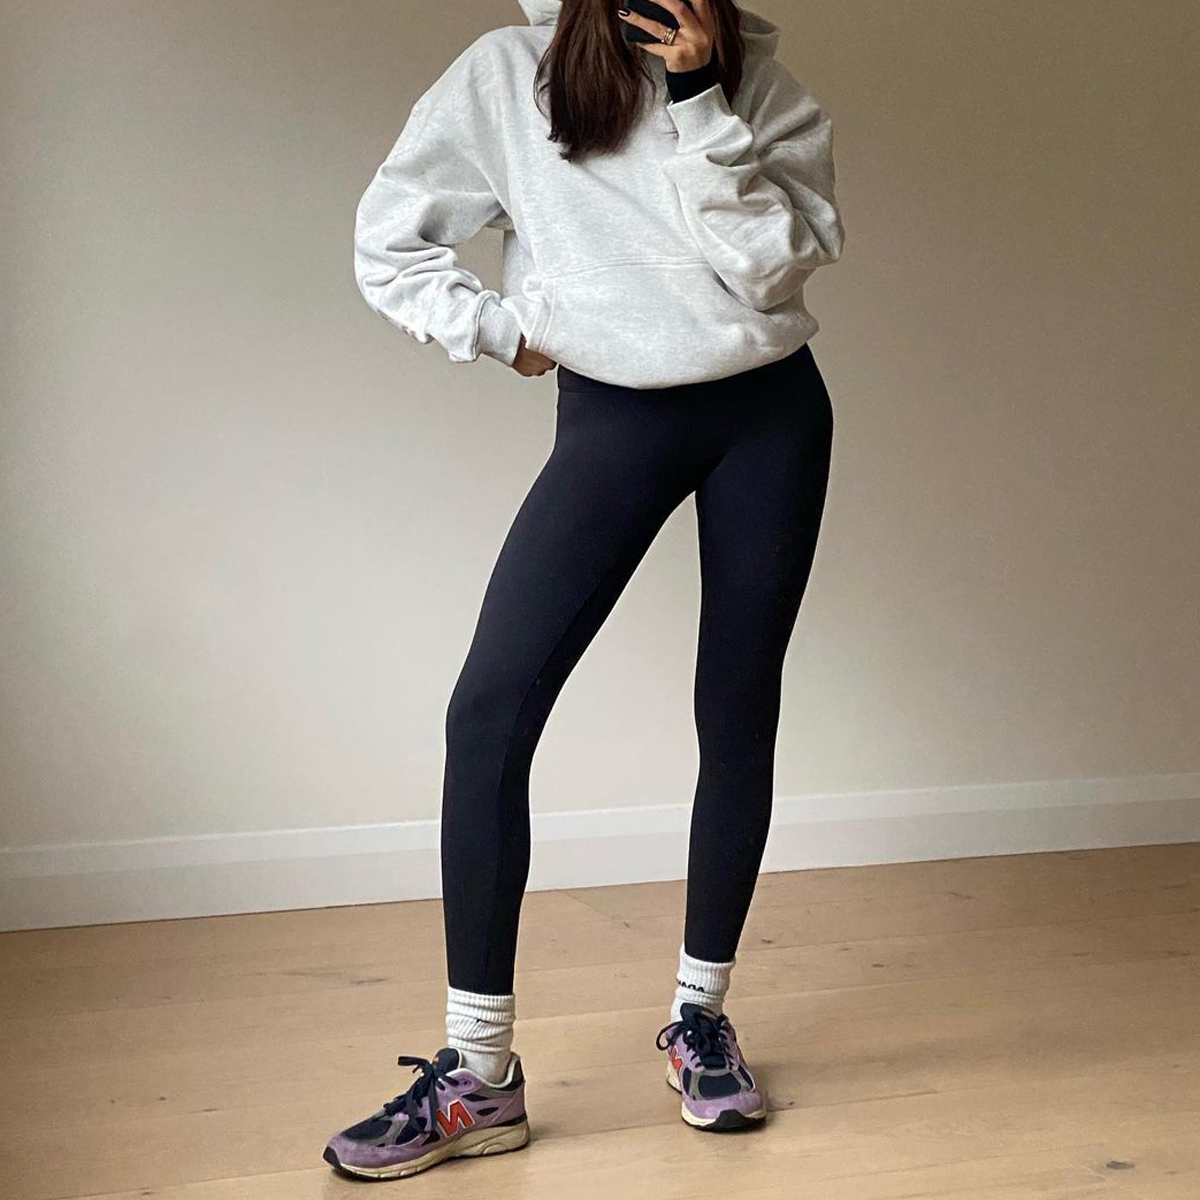 35 of the Best Athleisure Fashion Pieces for Moms